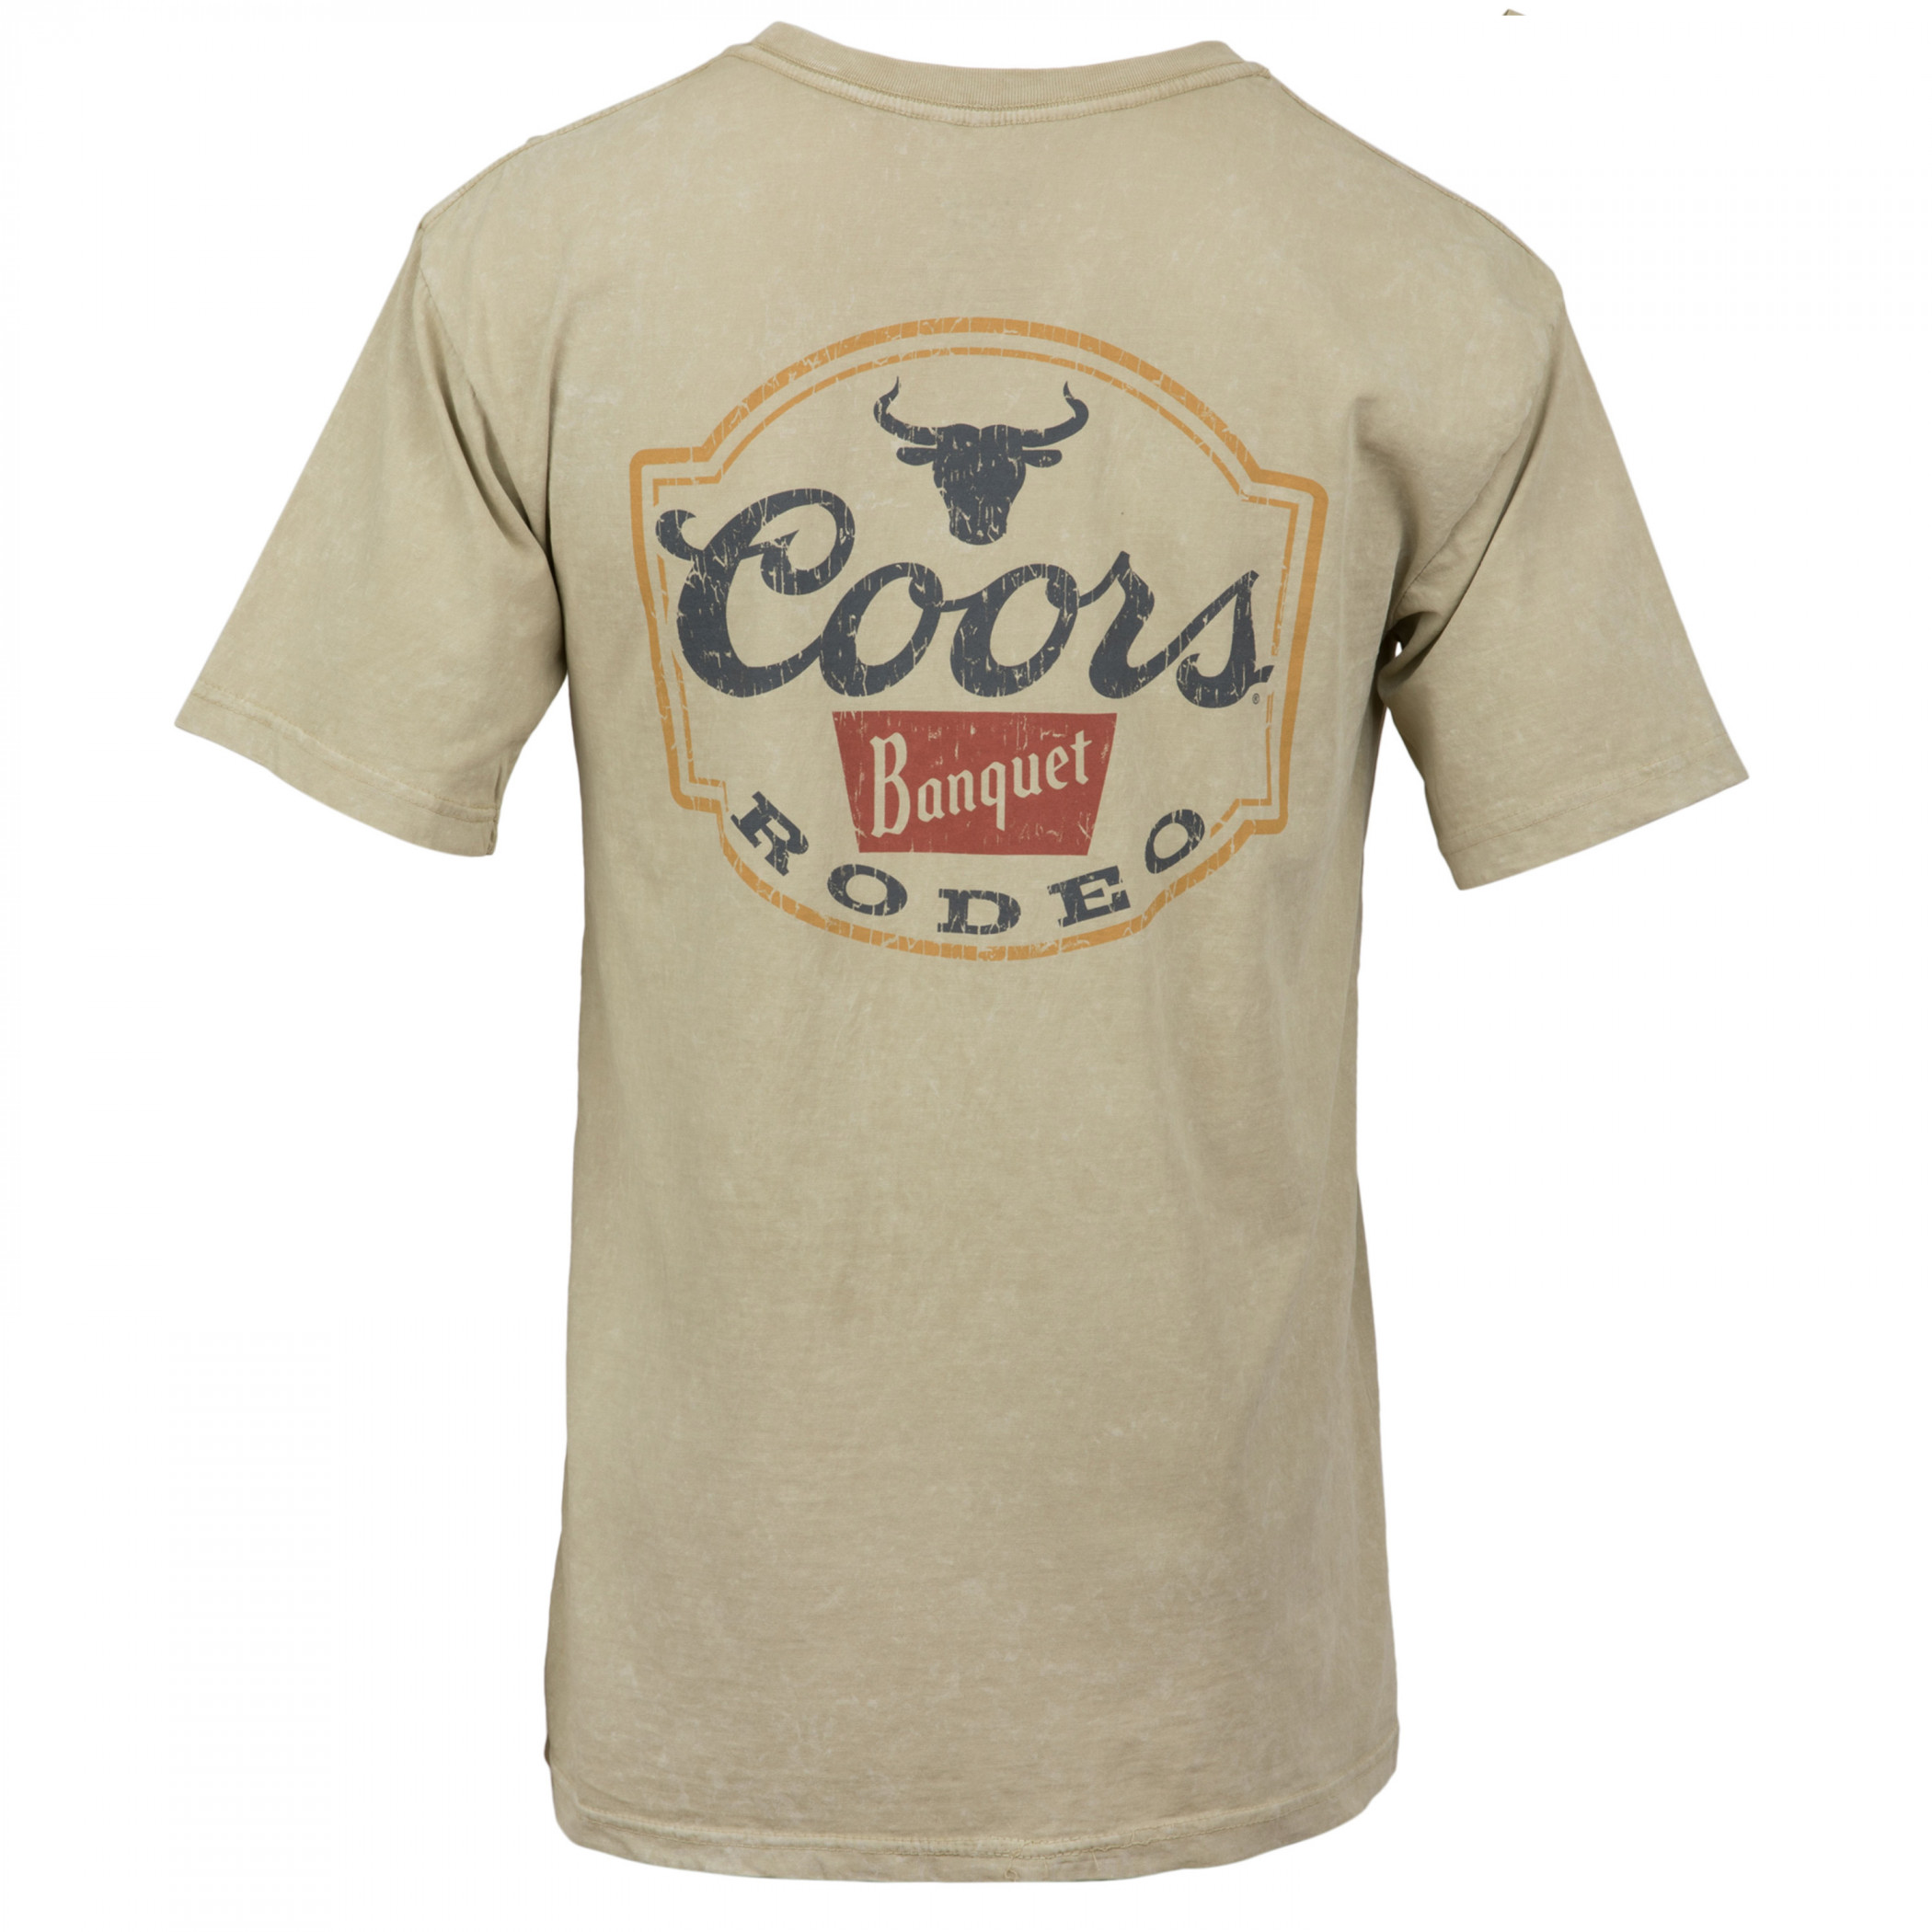 Coors Banquet Rodeo Logo Distressed Front and Back Tan T-Shirt-Medium